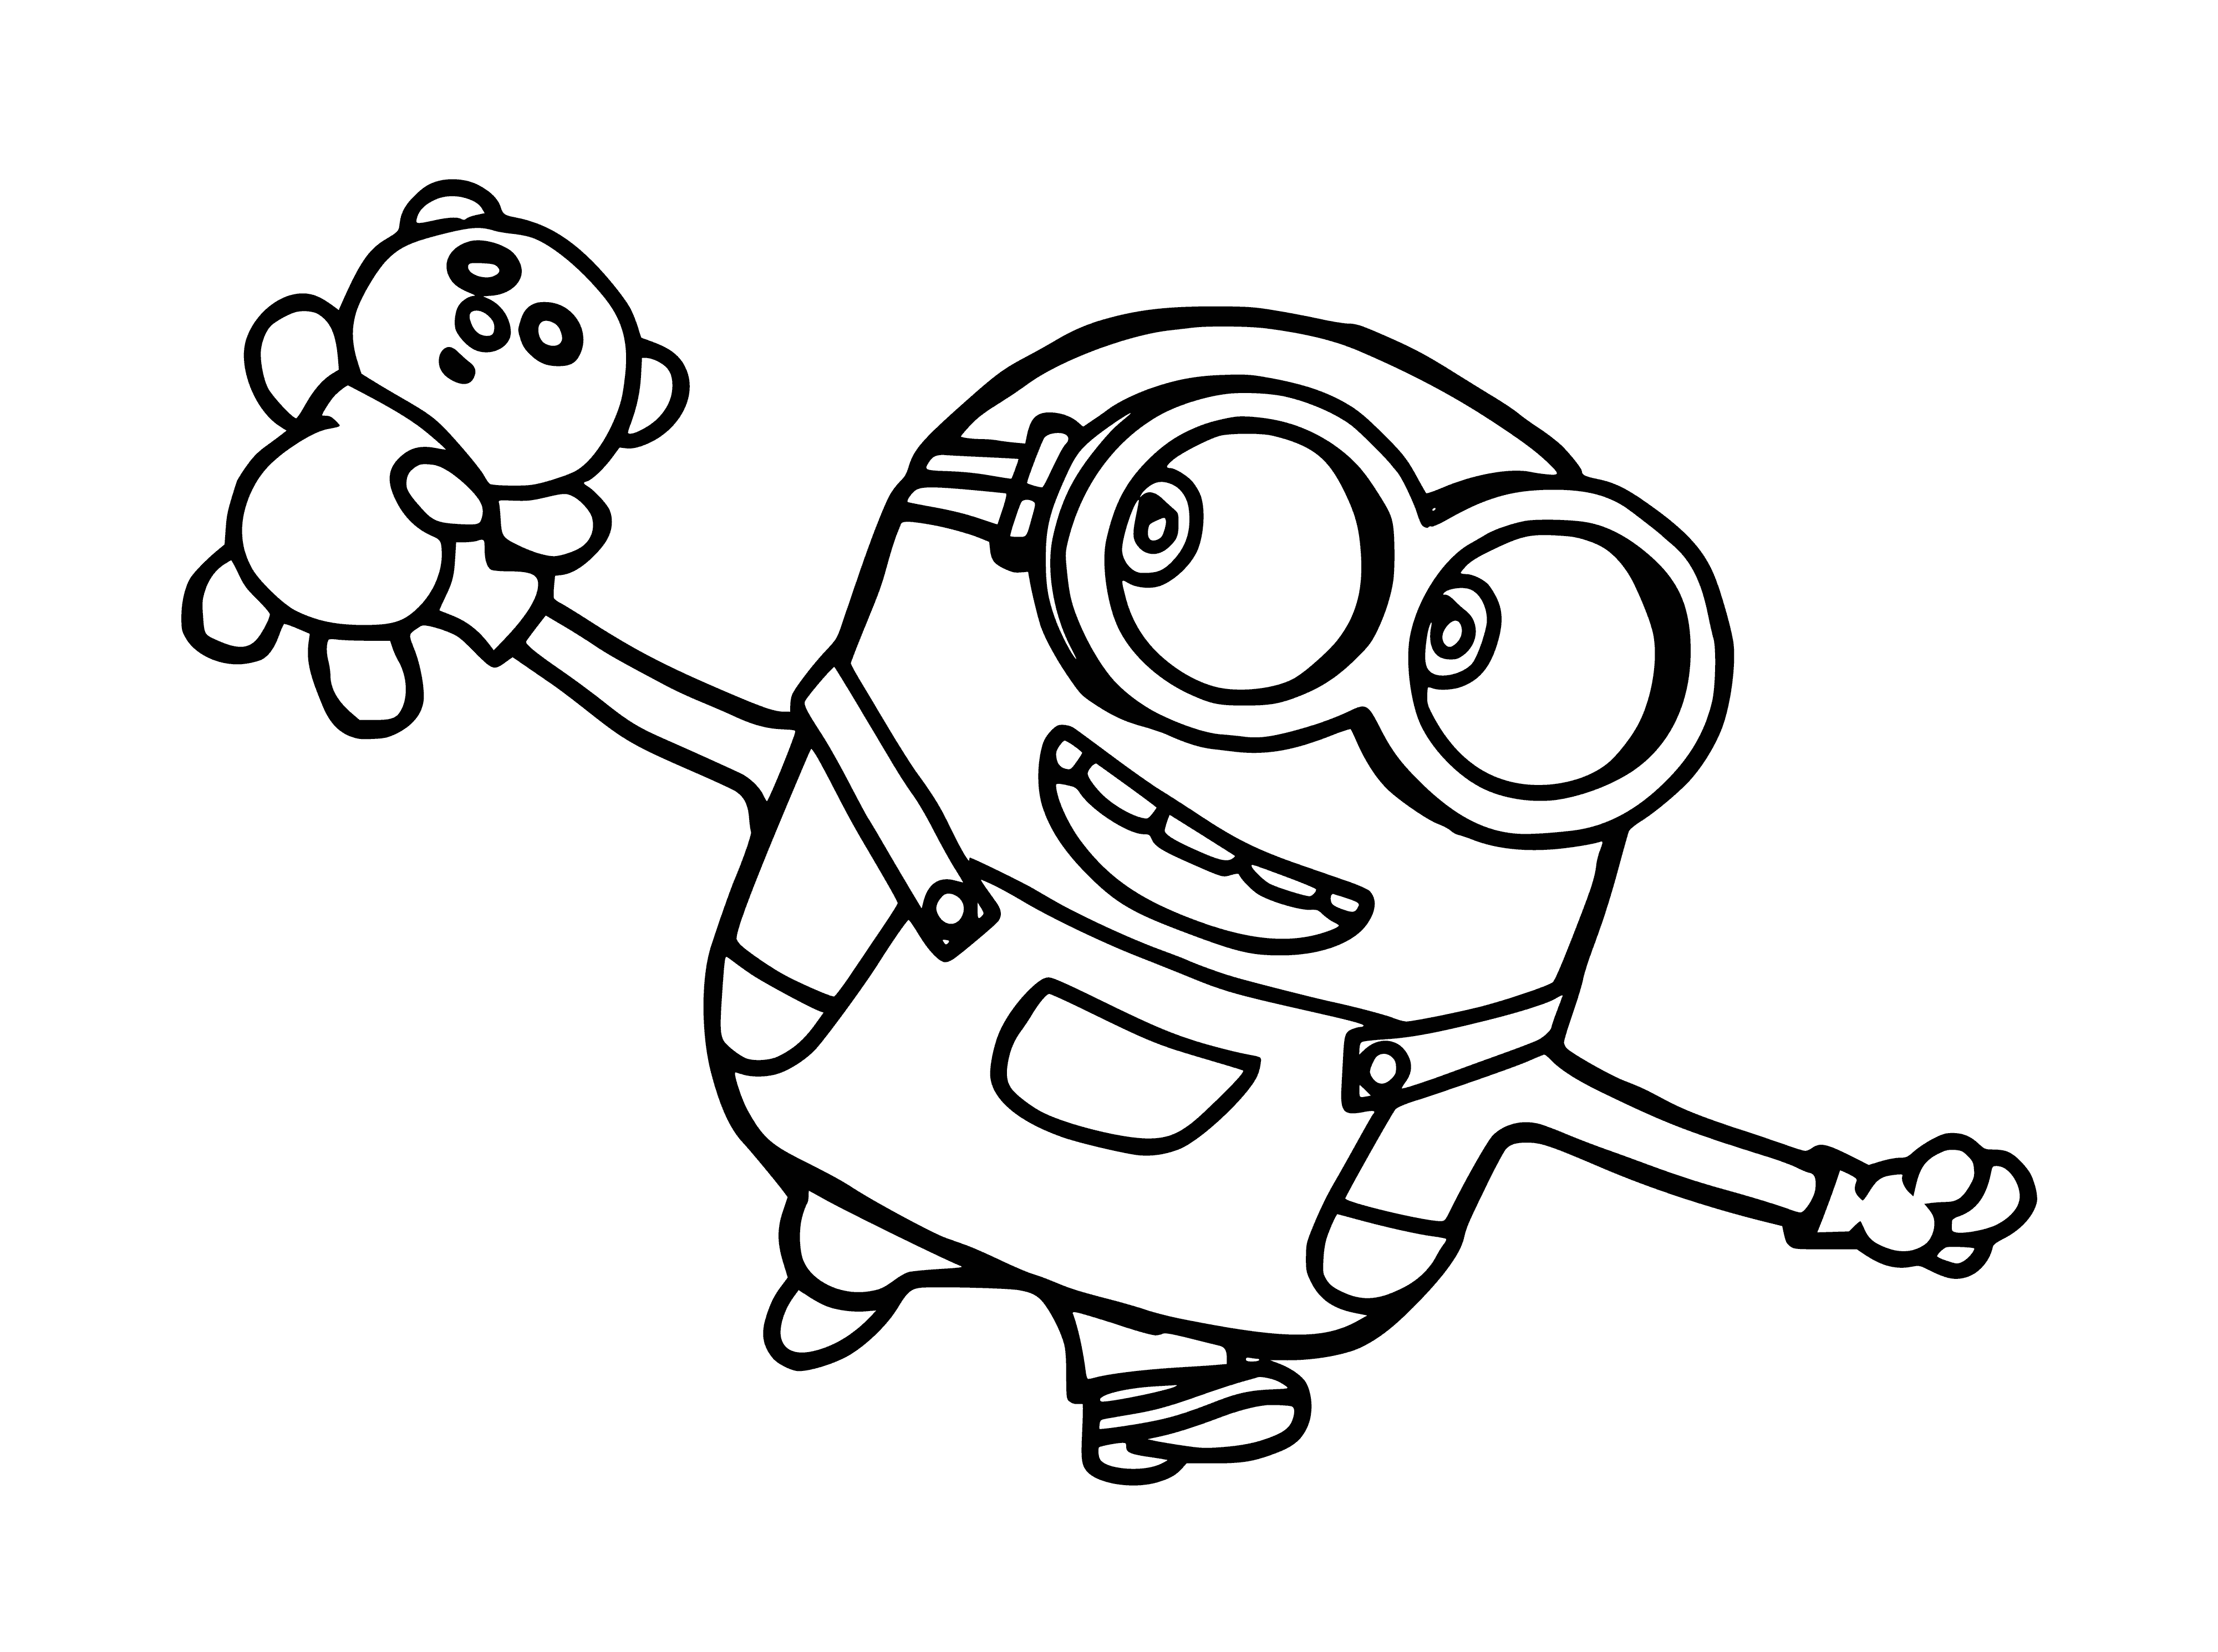 coloring page: Minion Bob holds a teddy bear, wearing blue overall, with two eyes and a mouth, long thin arms.